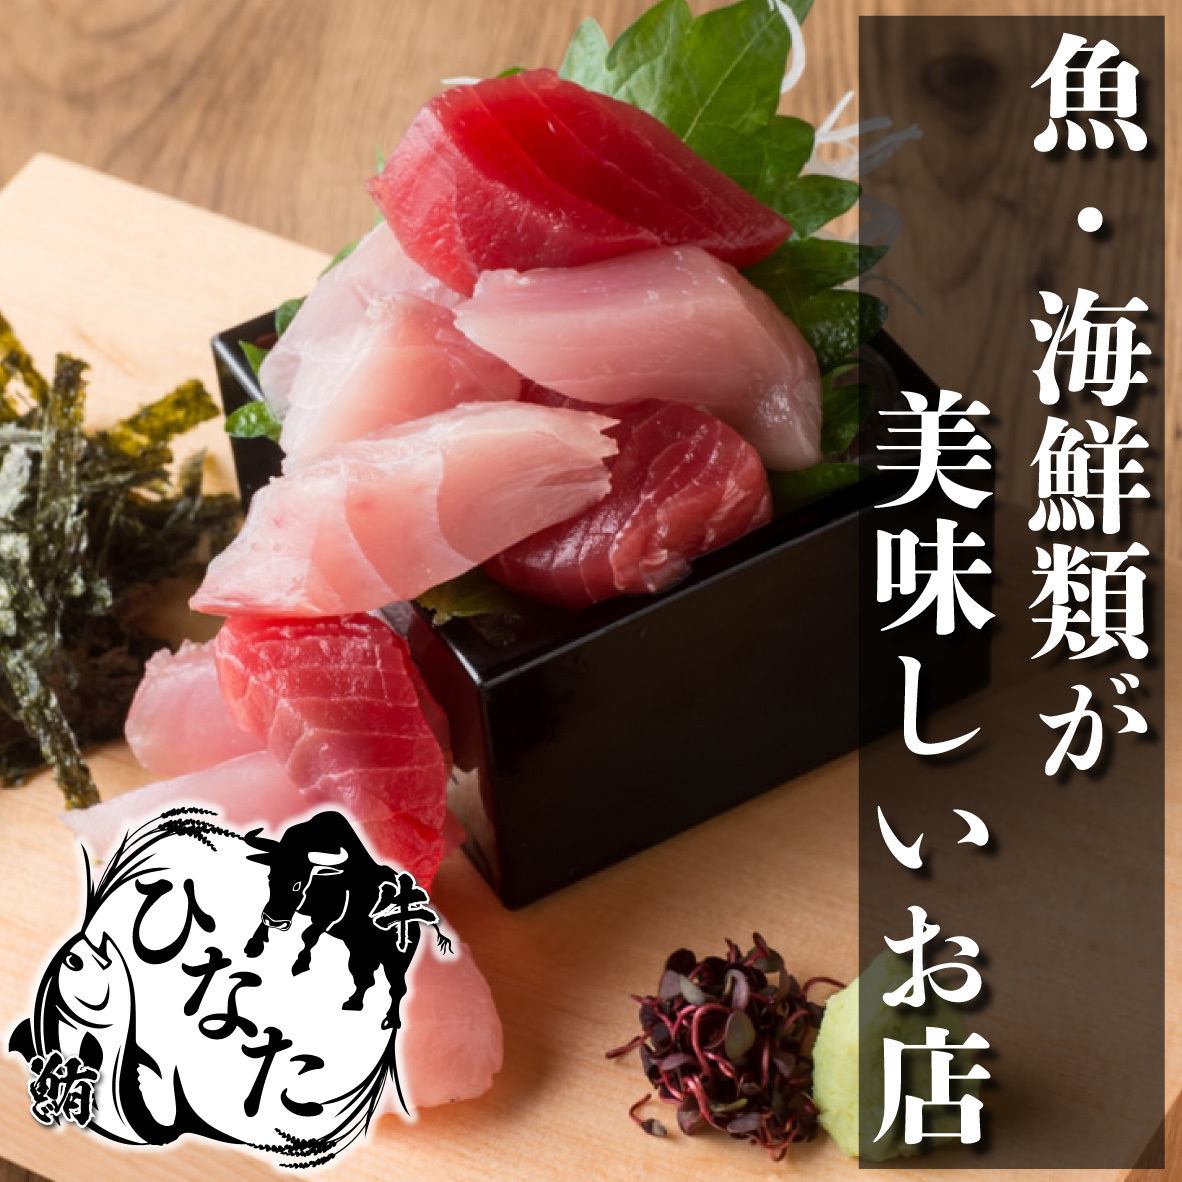 Holding an oyster fair ♪ Offering a variety of oyster dishes ★